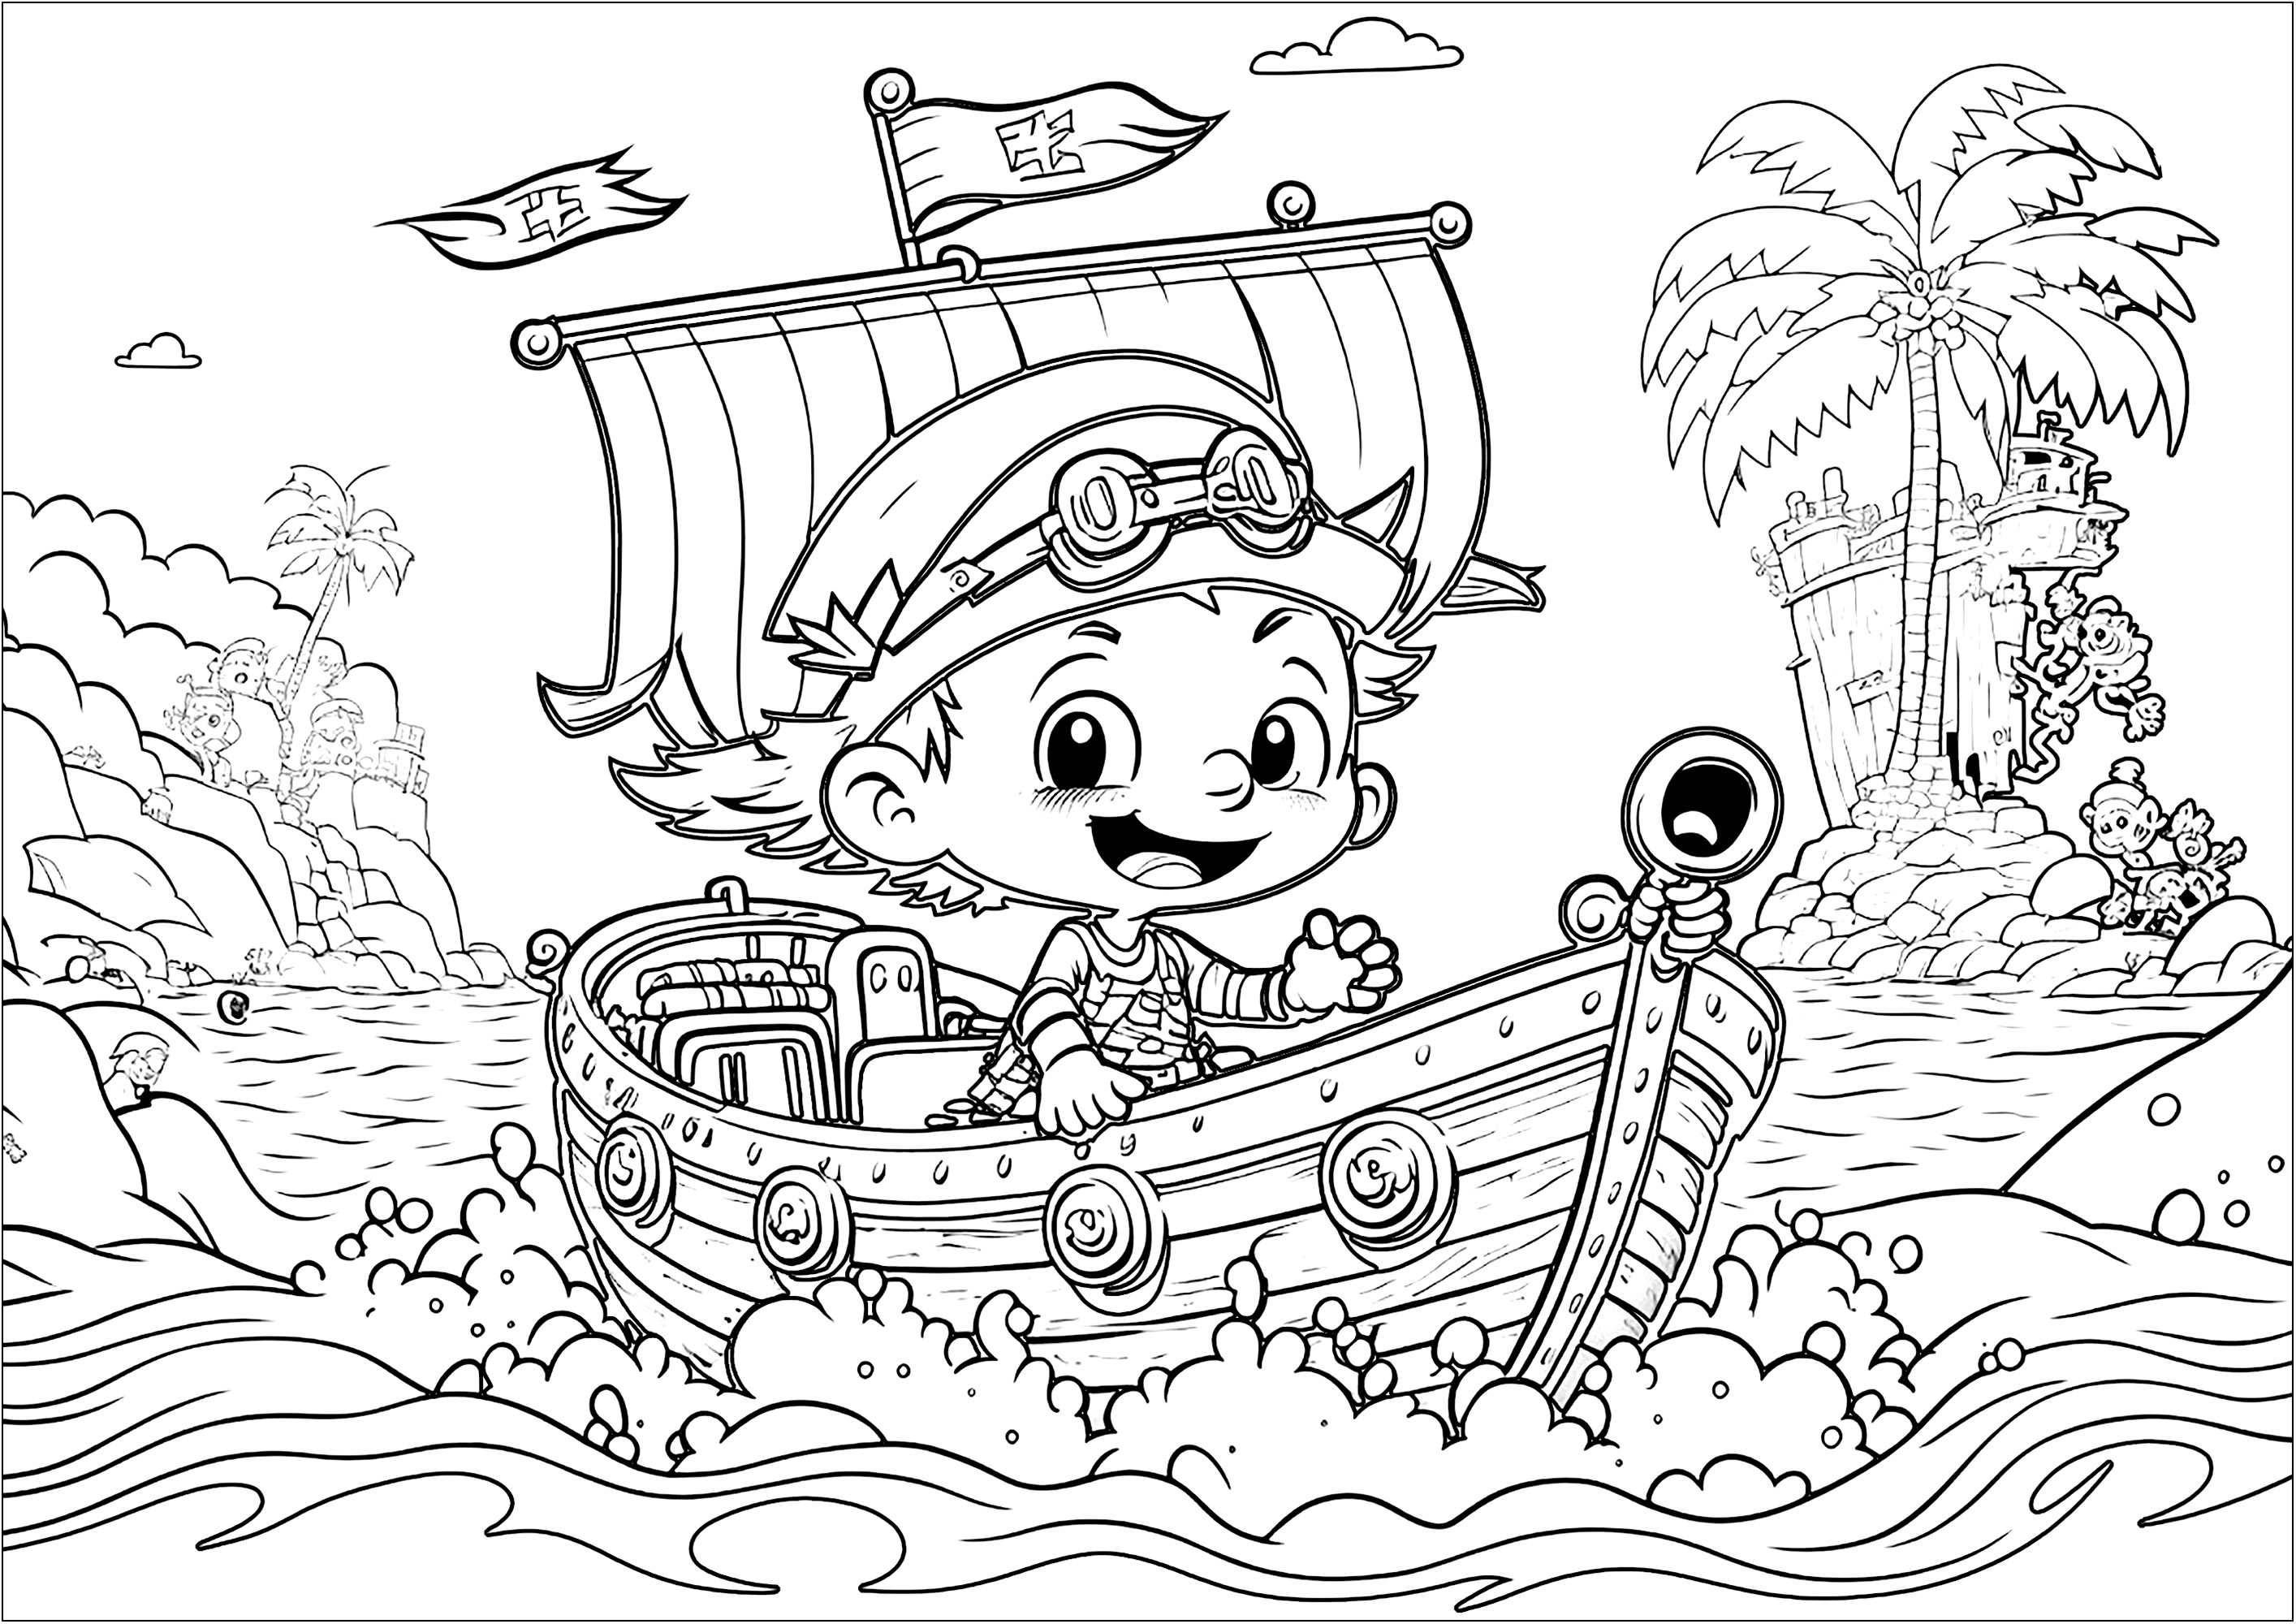 A nice pirate to color, on his way to new adventures aboard his beautiful ship. The style of this coloring page is close to Disney / Pixar characters.
